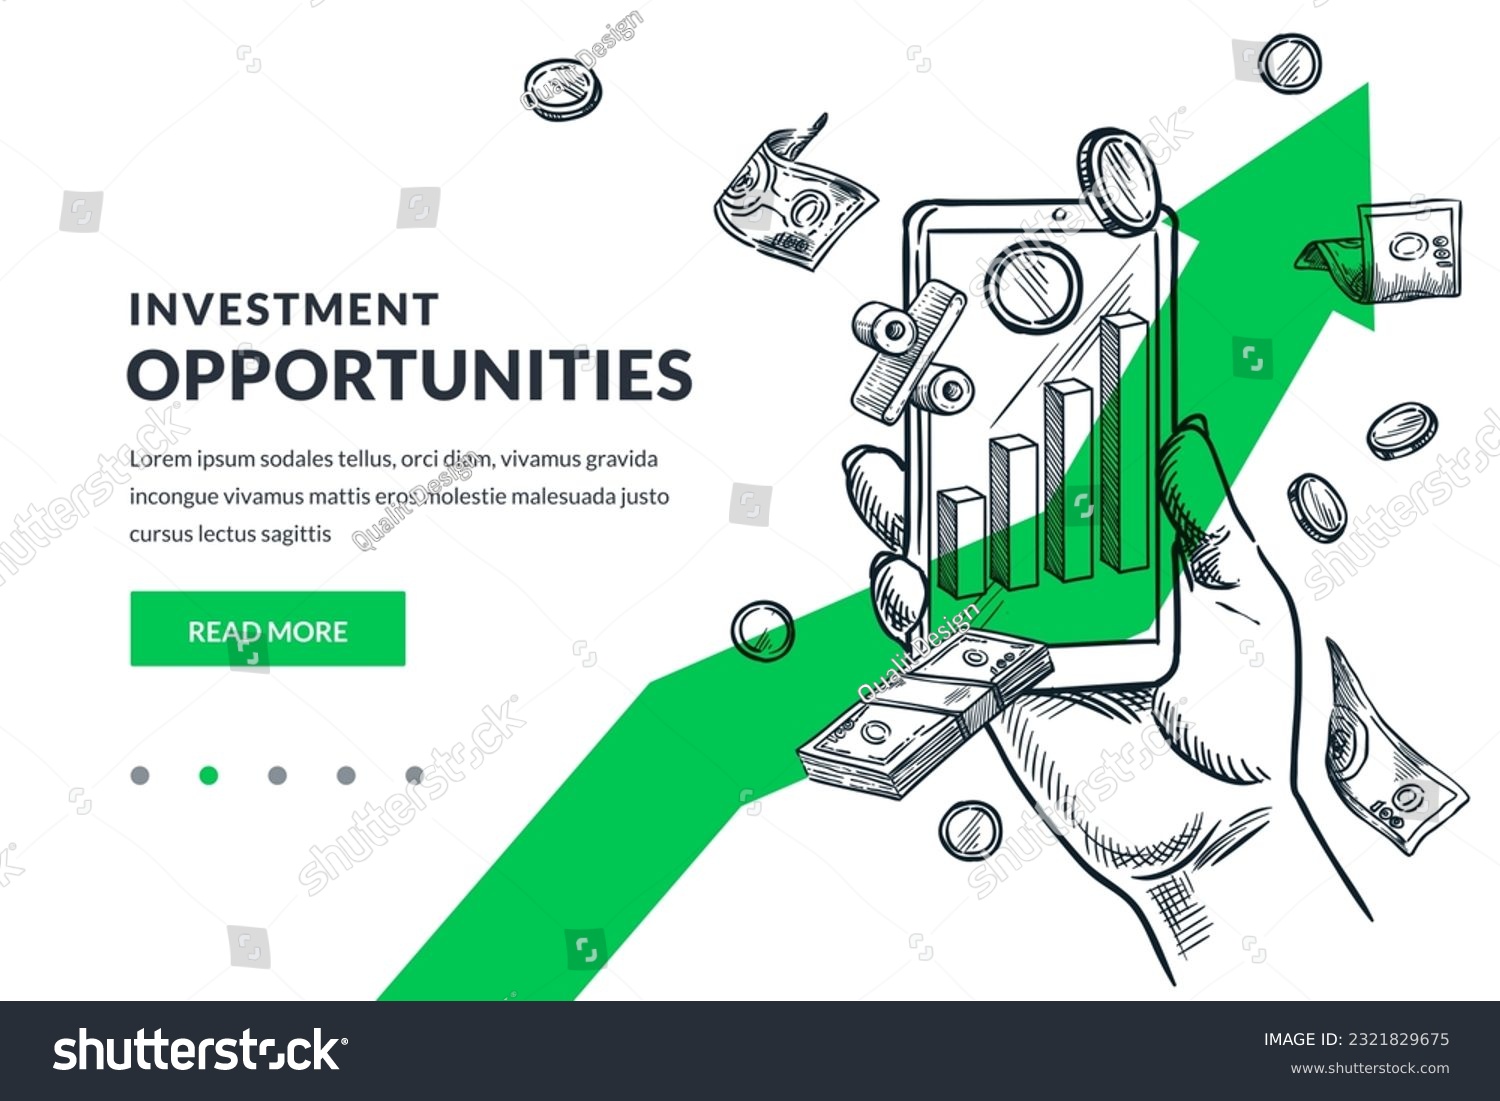 Investment, market trade and finance concept. Money financial online management. Hand drawn vector sketch illustration of mobile phone trading bank application. Poster banner design template #2321829675